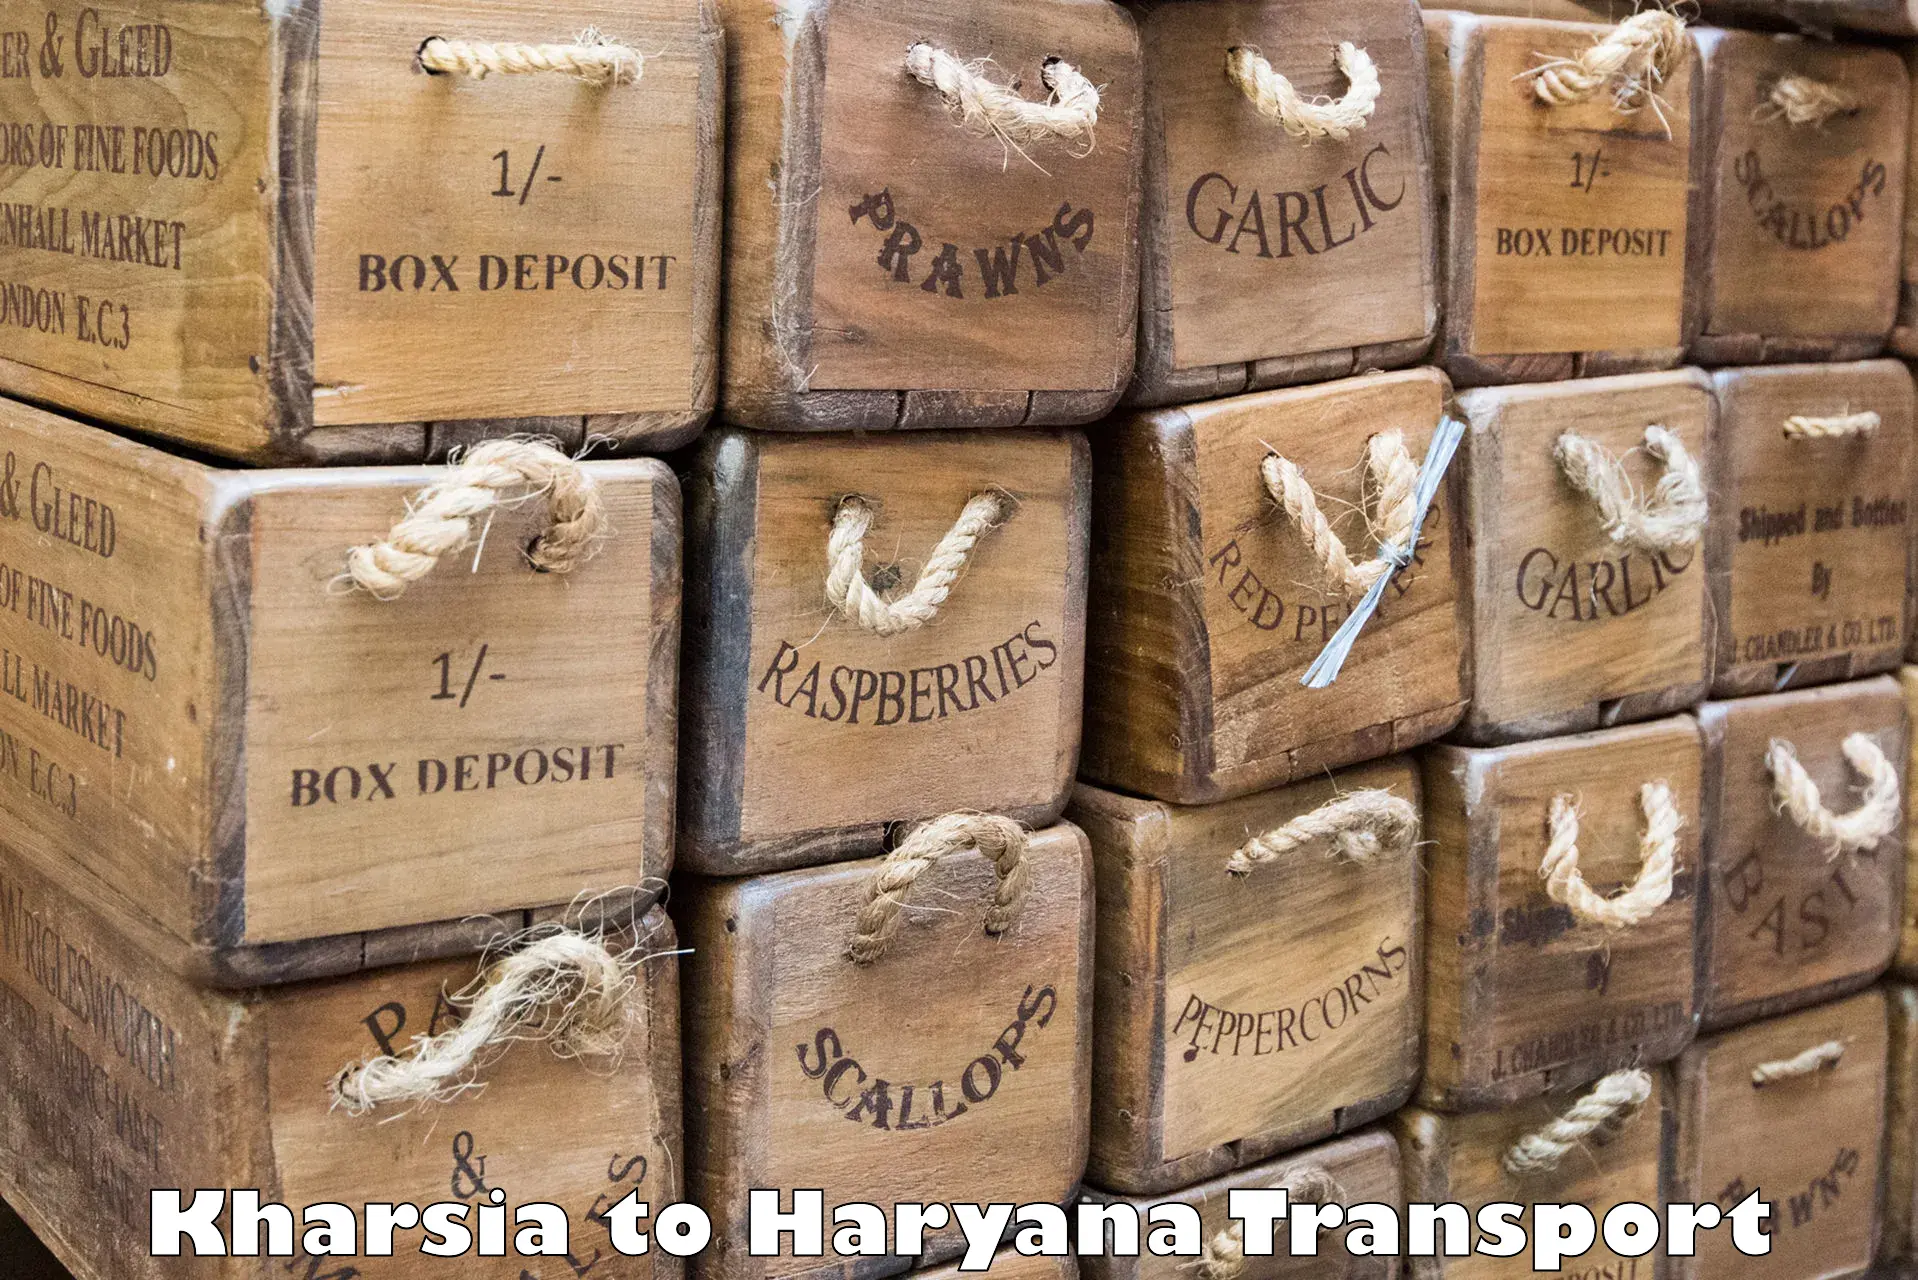 Container transport service in Kharsia to Charkhari